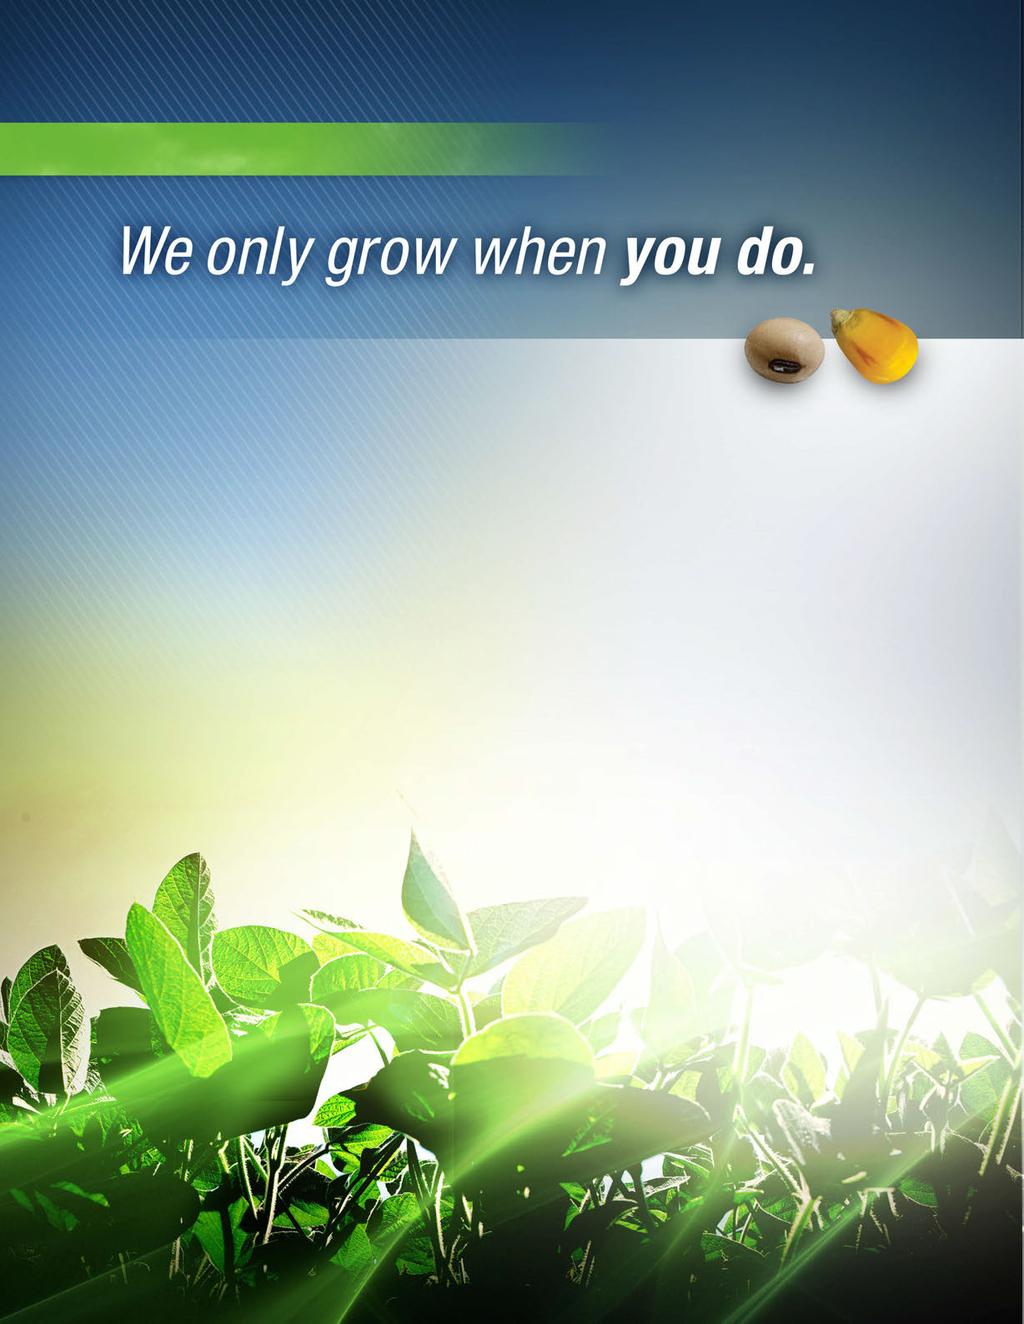 OUR STORY Axis Seed is the fastest-growing independent seed company in the U.S., thanks to our unique business model.